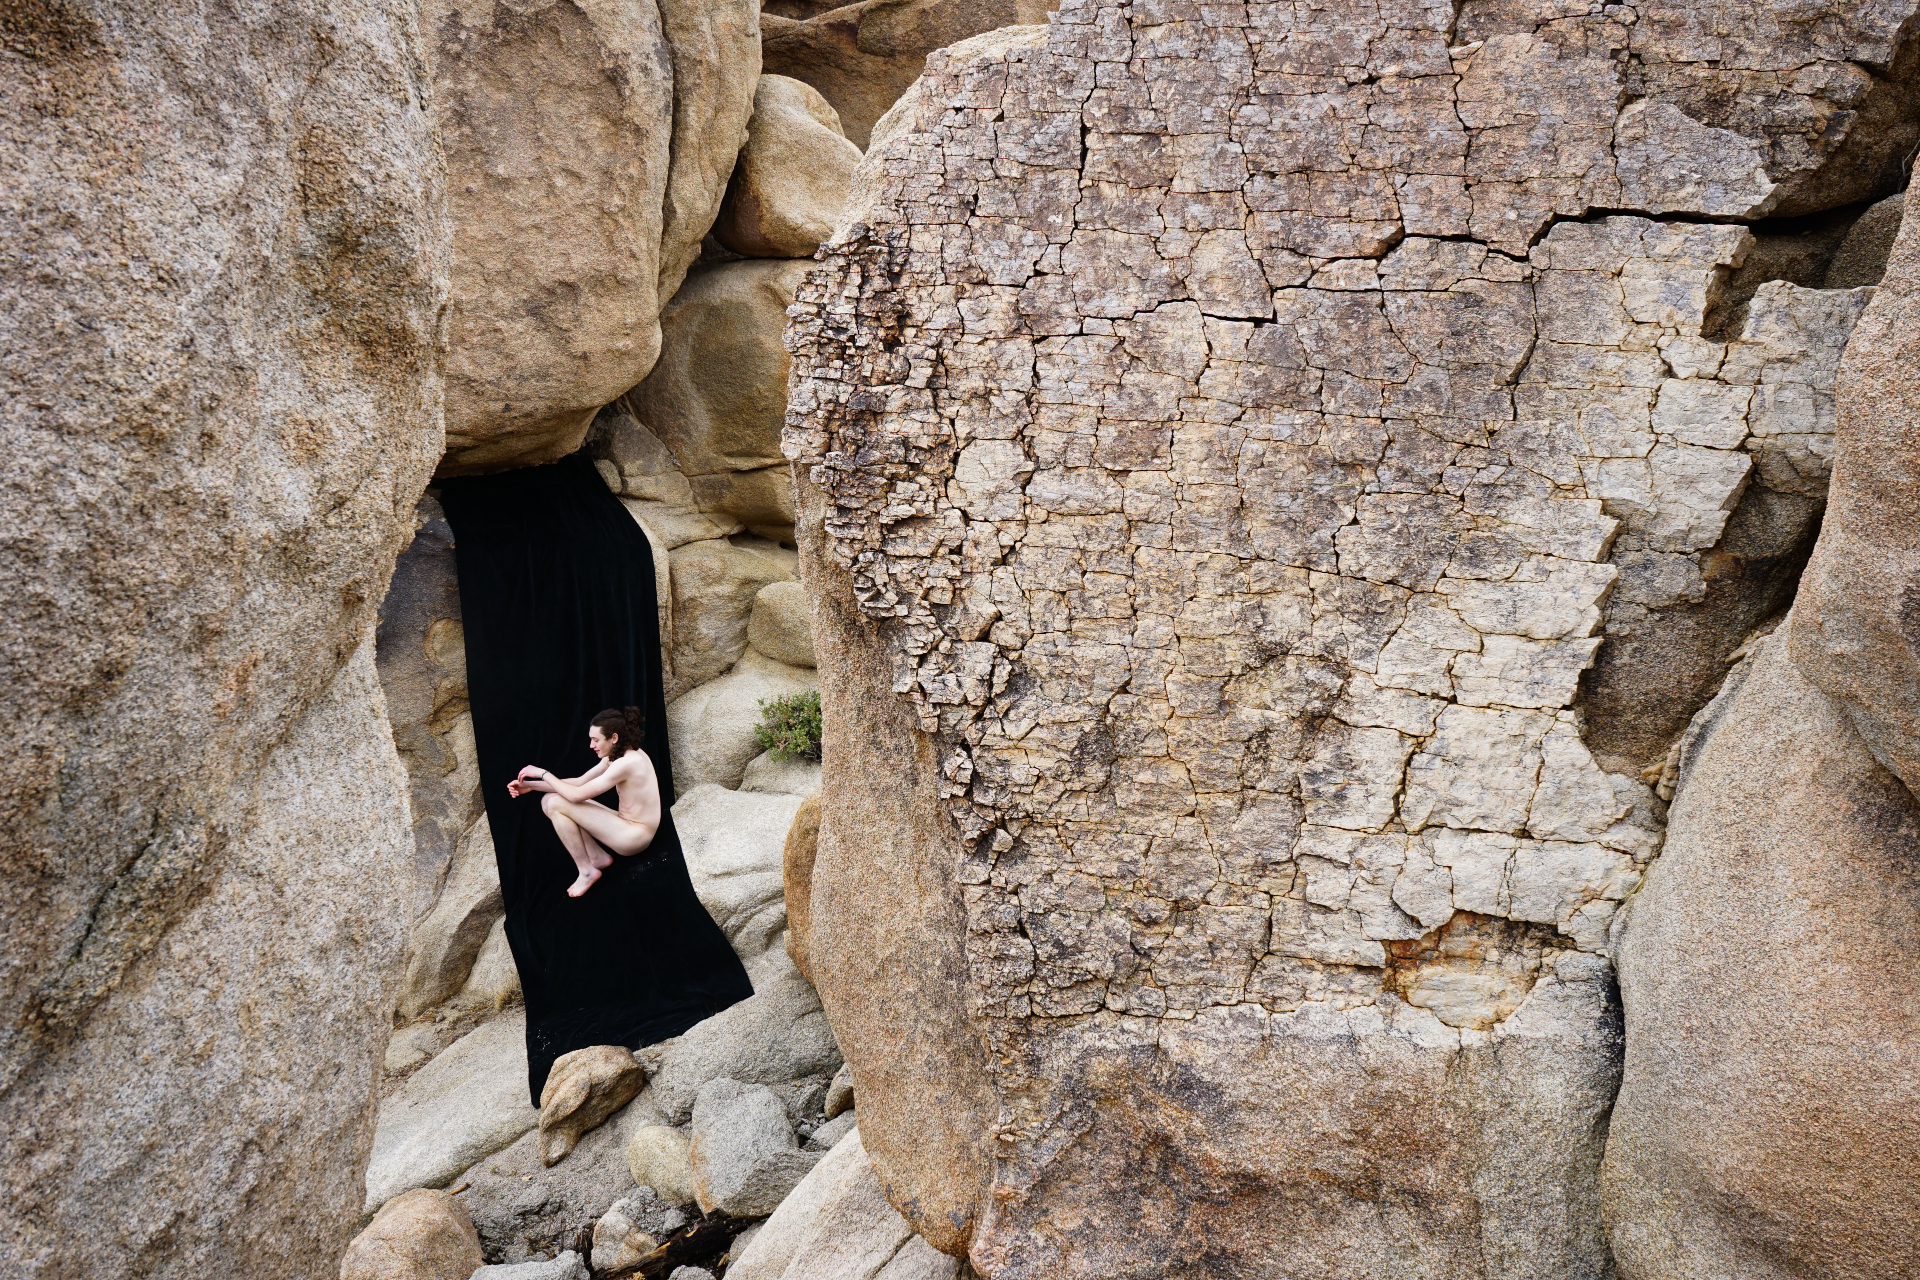 person sitting in a place with rock boulders